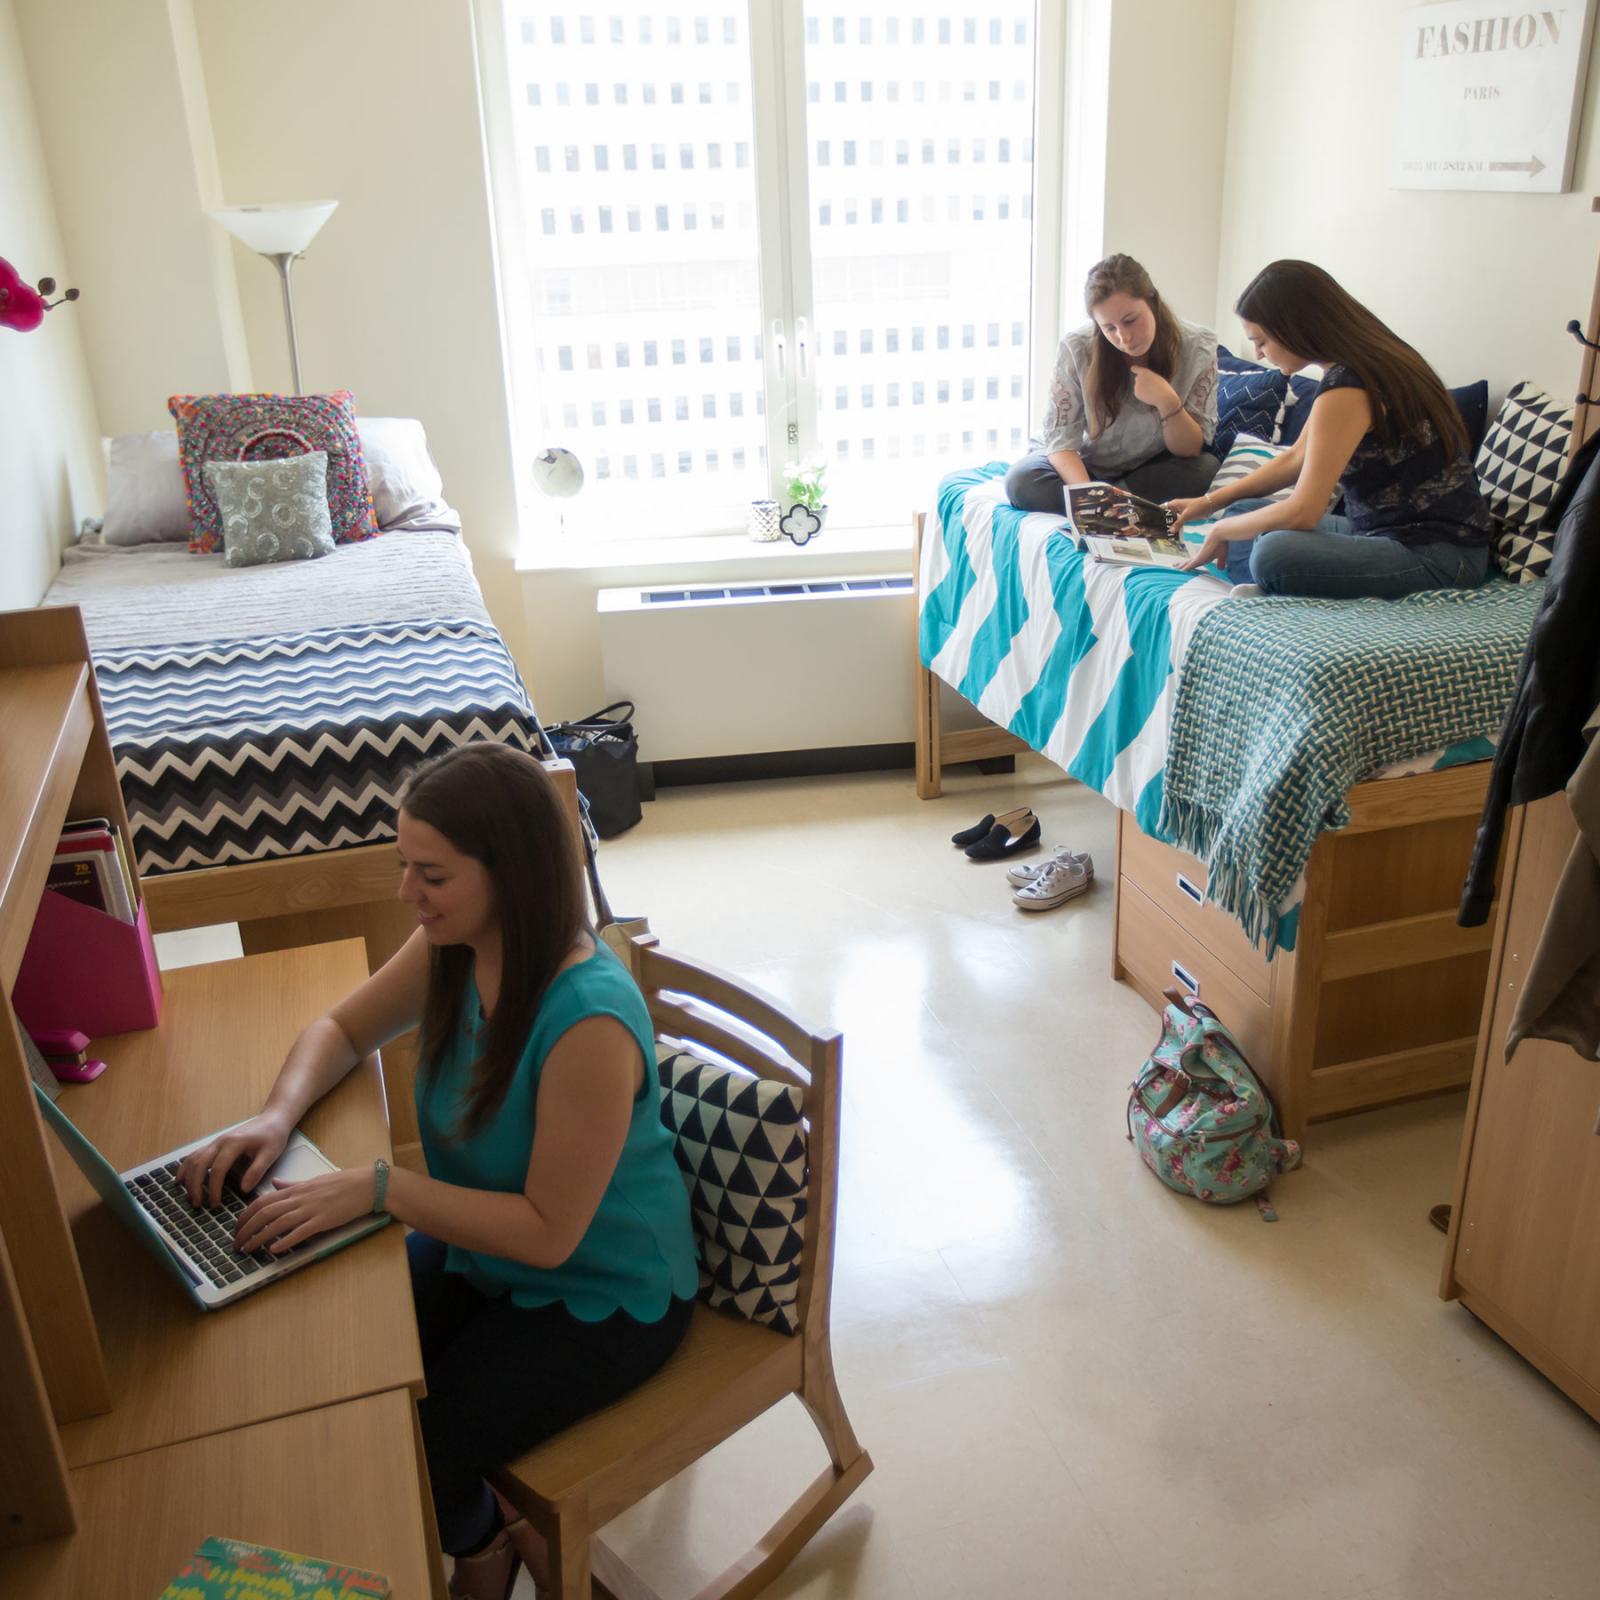 Students in a room in a residence hall studying and talking.